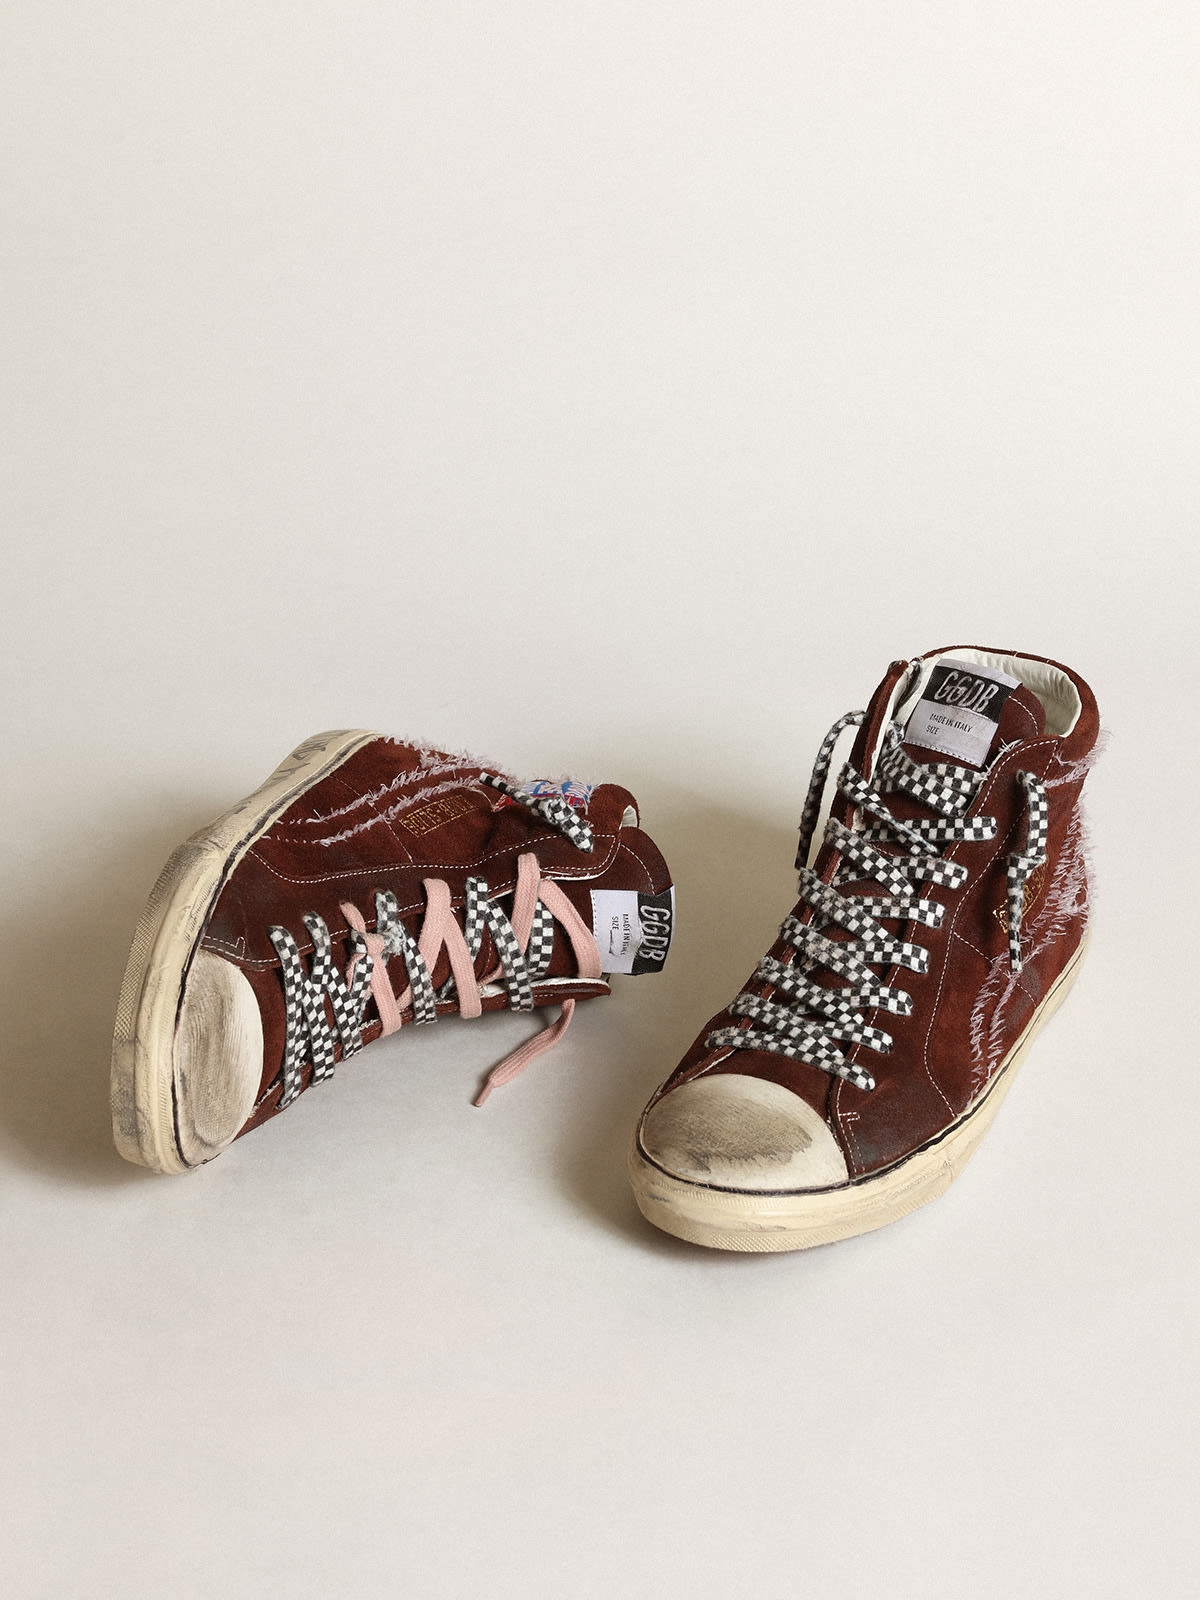 Golden Goose - Men's Slide in chocolate color suede and white stitching in 